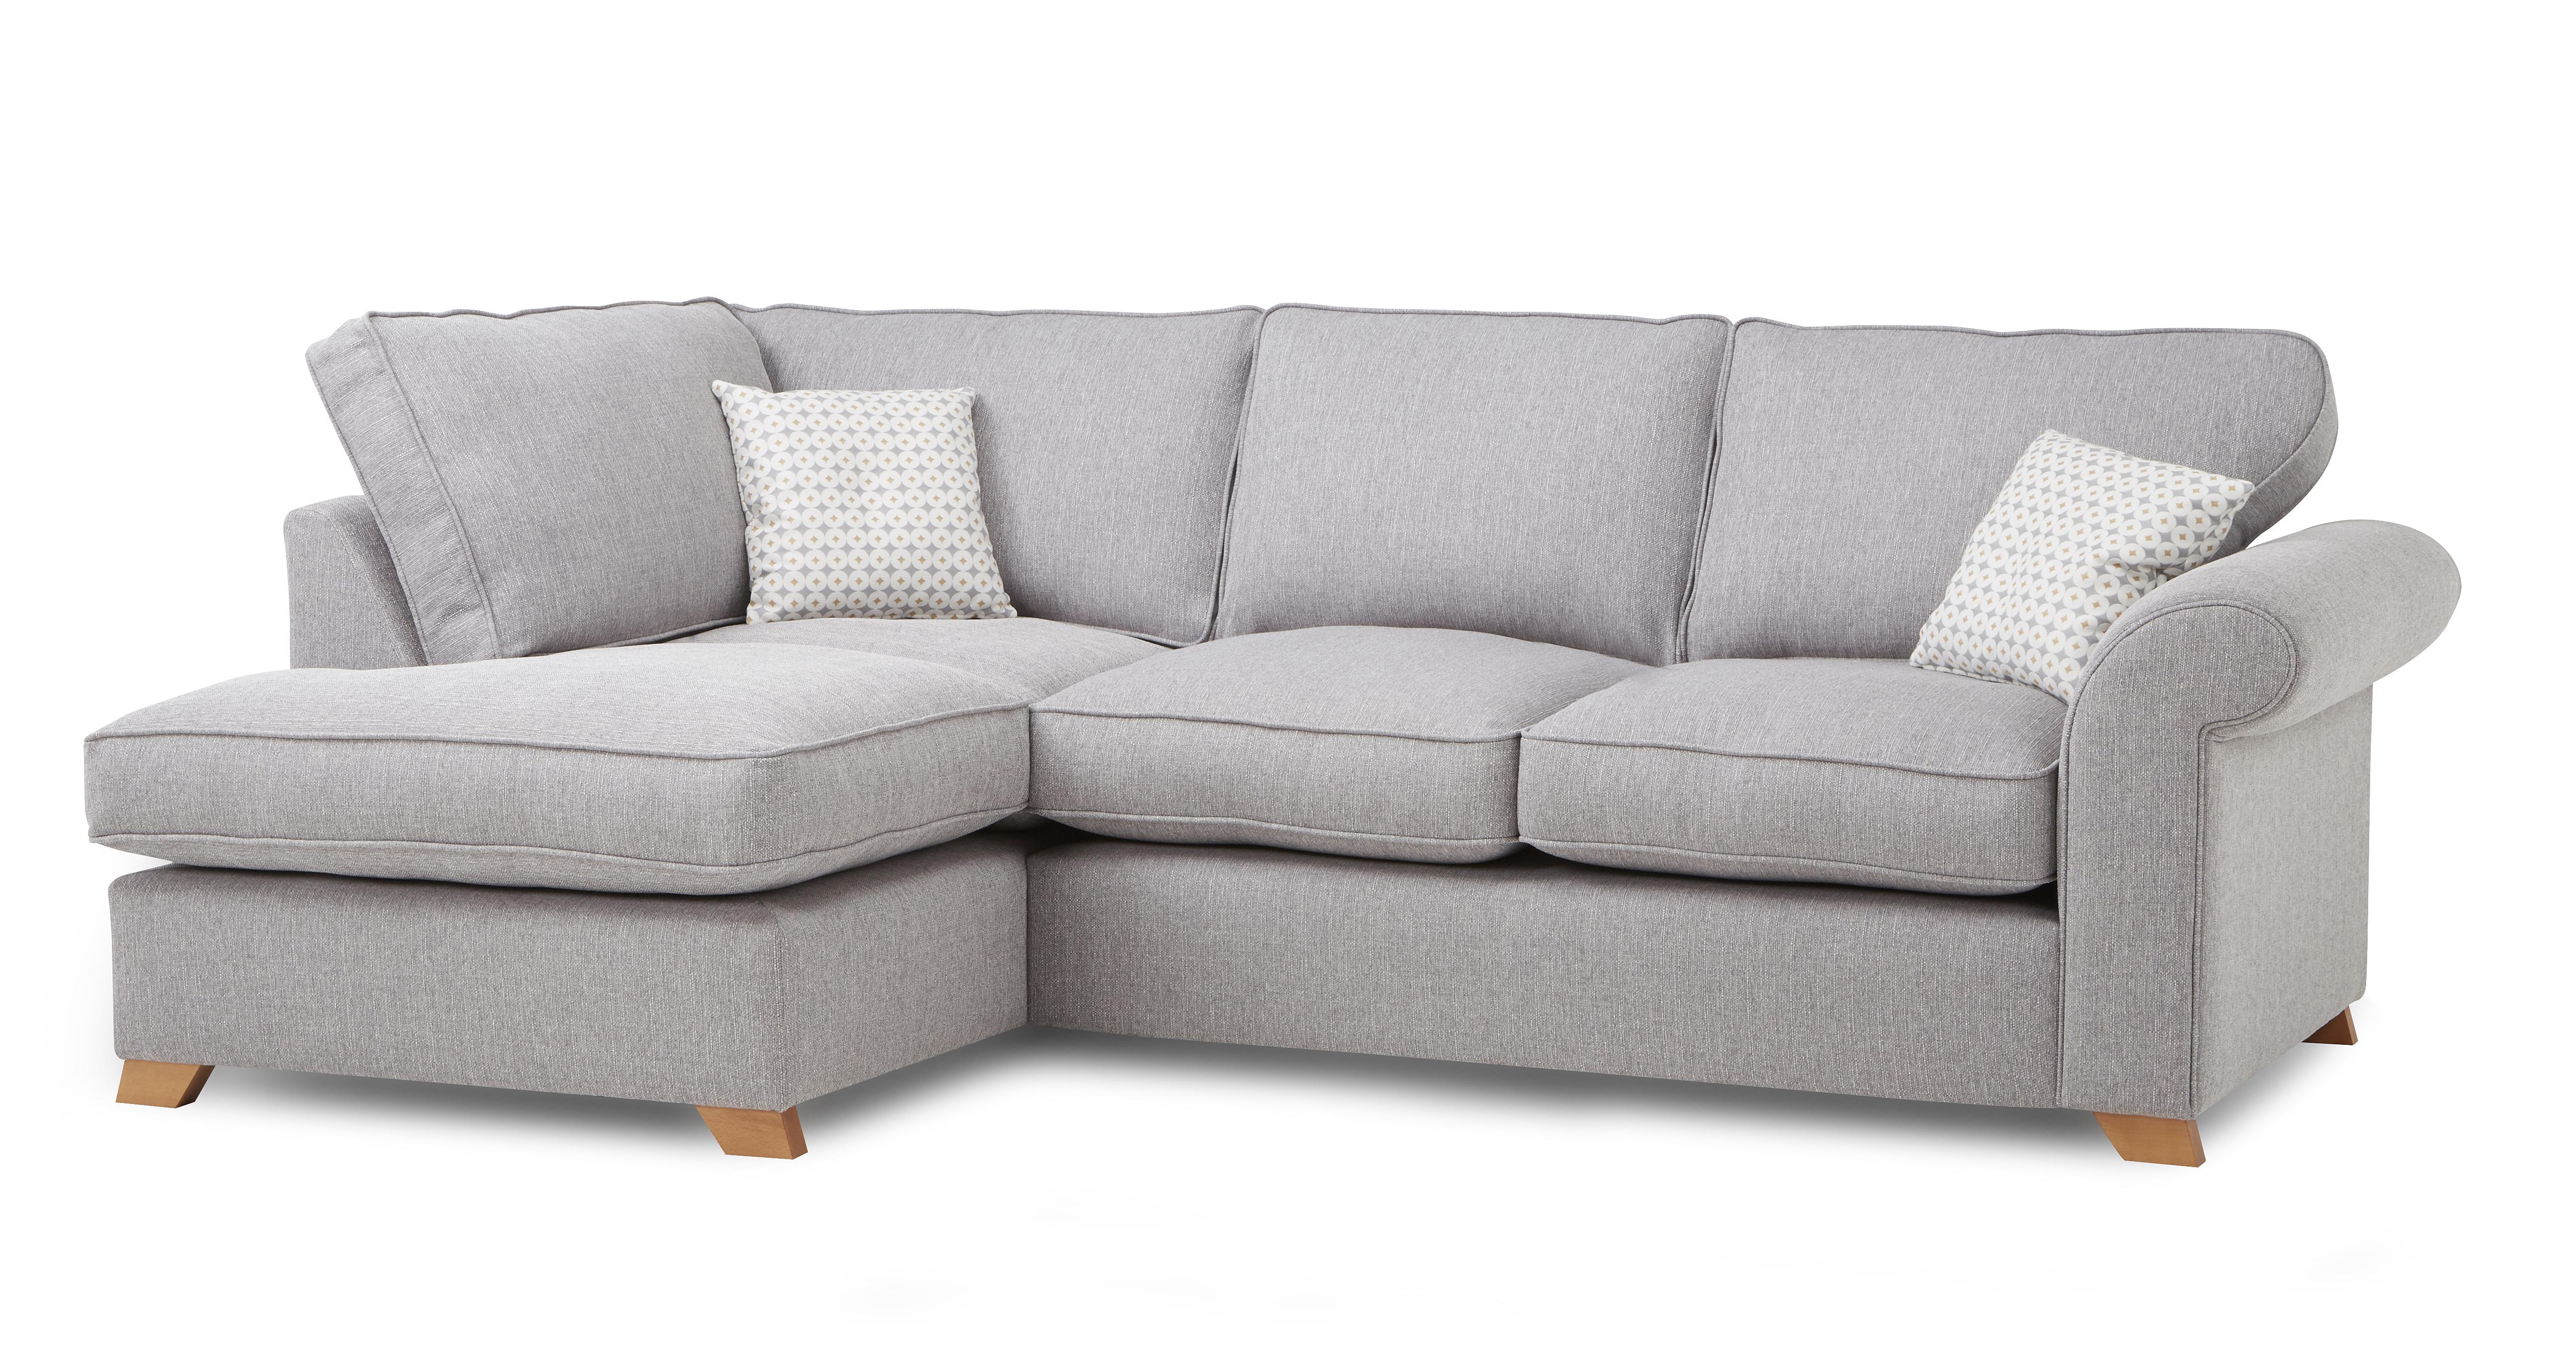 grey corner couch sofa bed